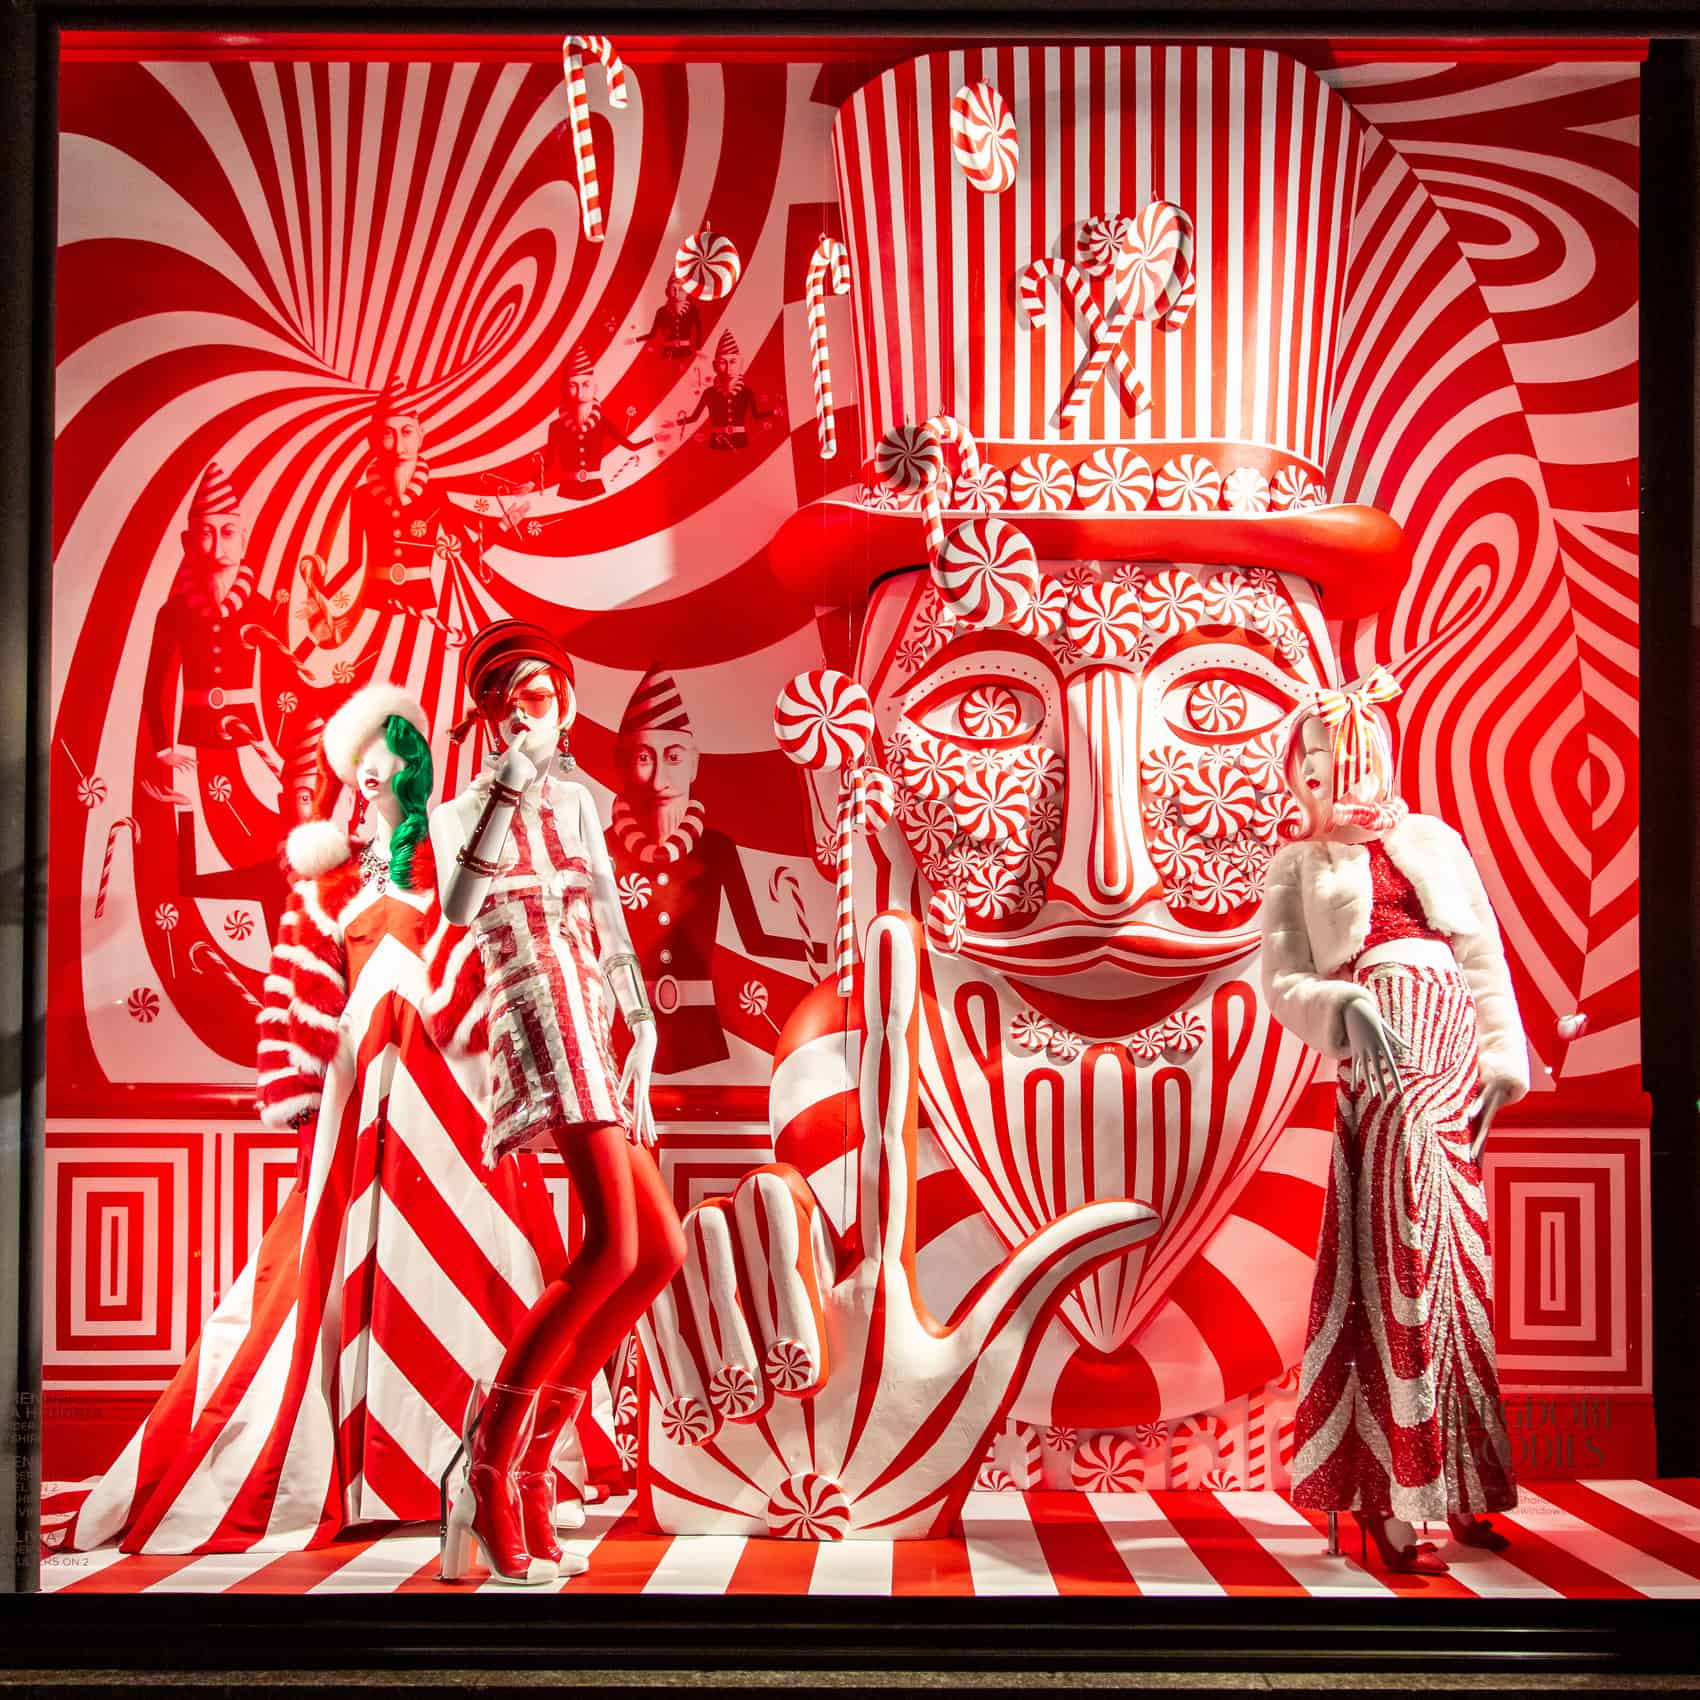 6 Fascinating Facts You Never Knew About Bergdorf Goodman's Fabulous  Holiday Windows - Daily Front Row